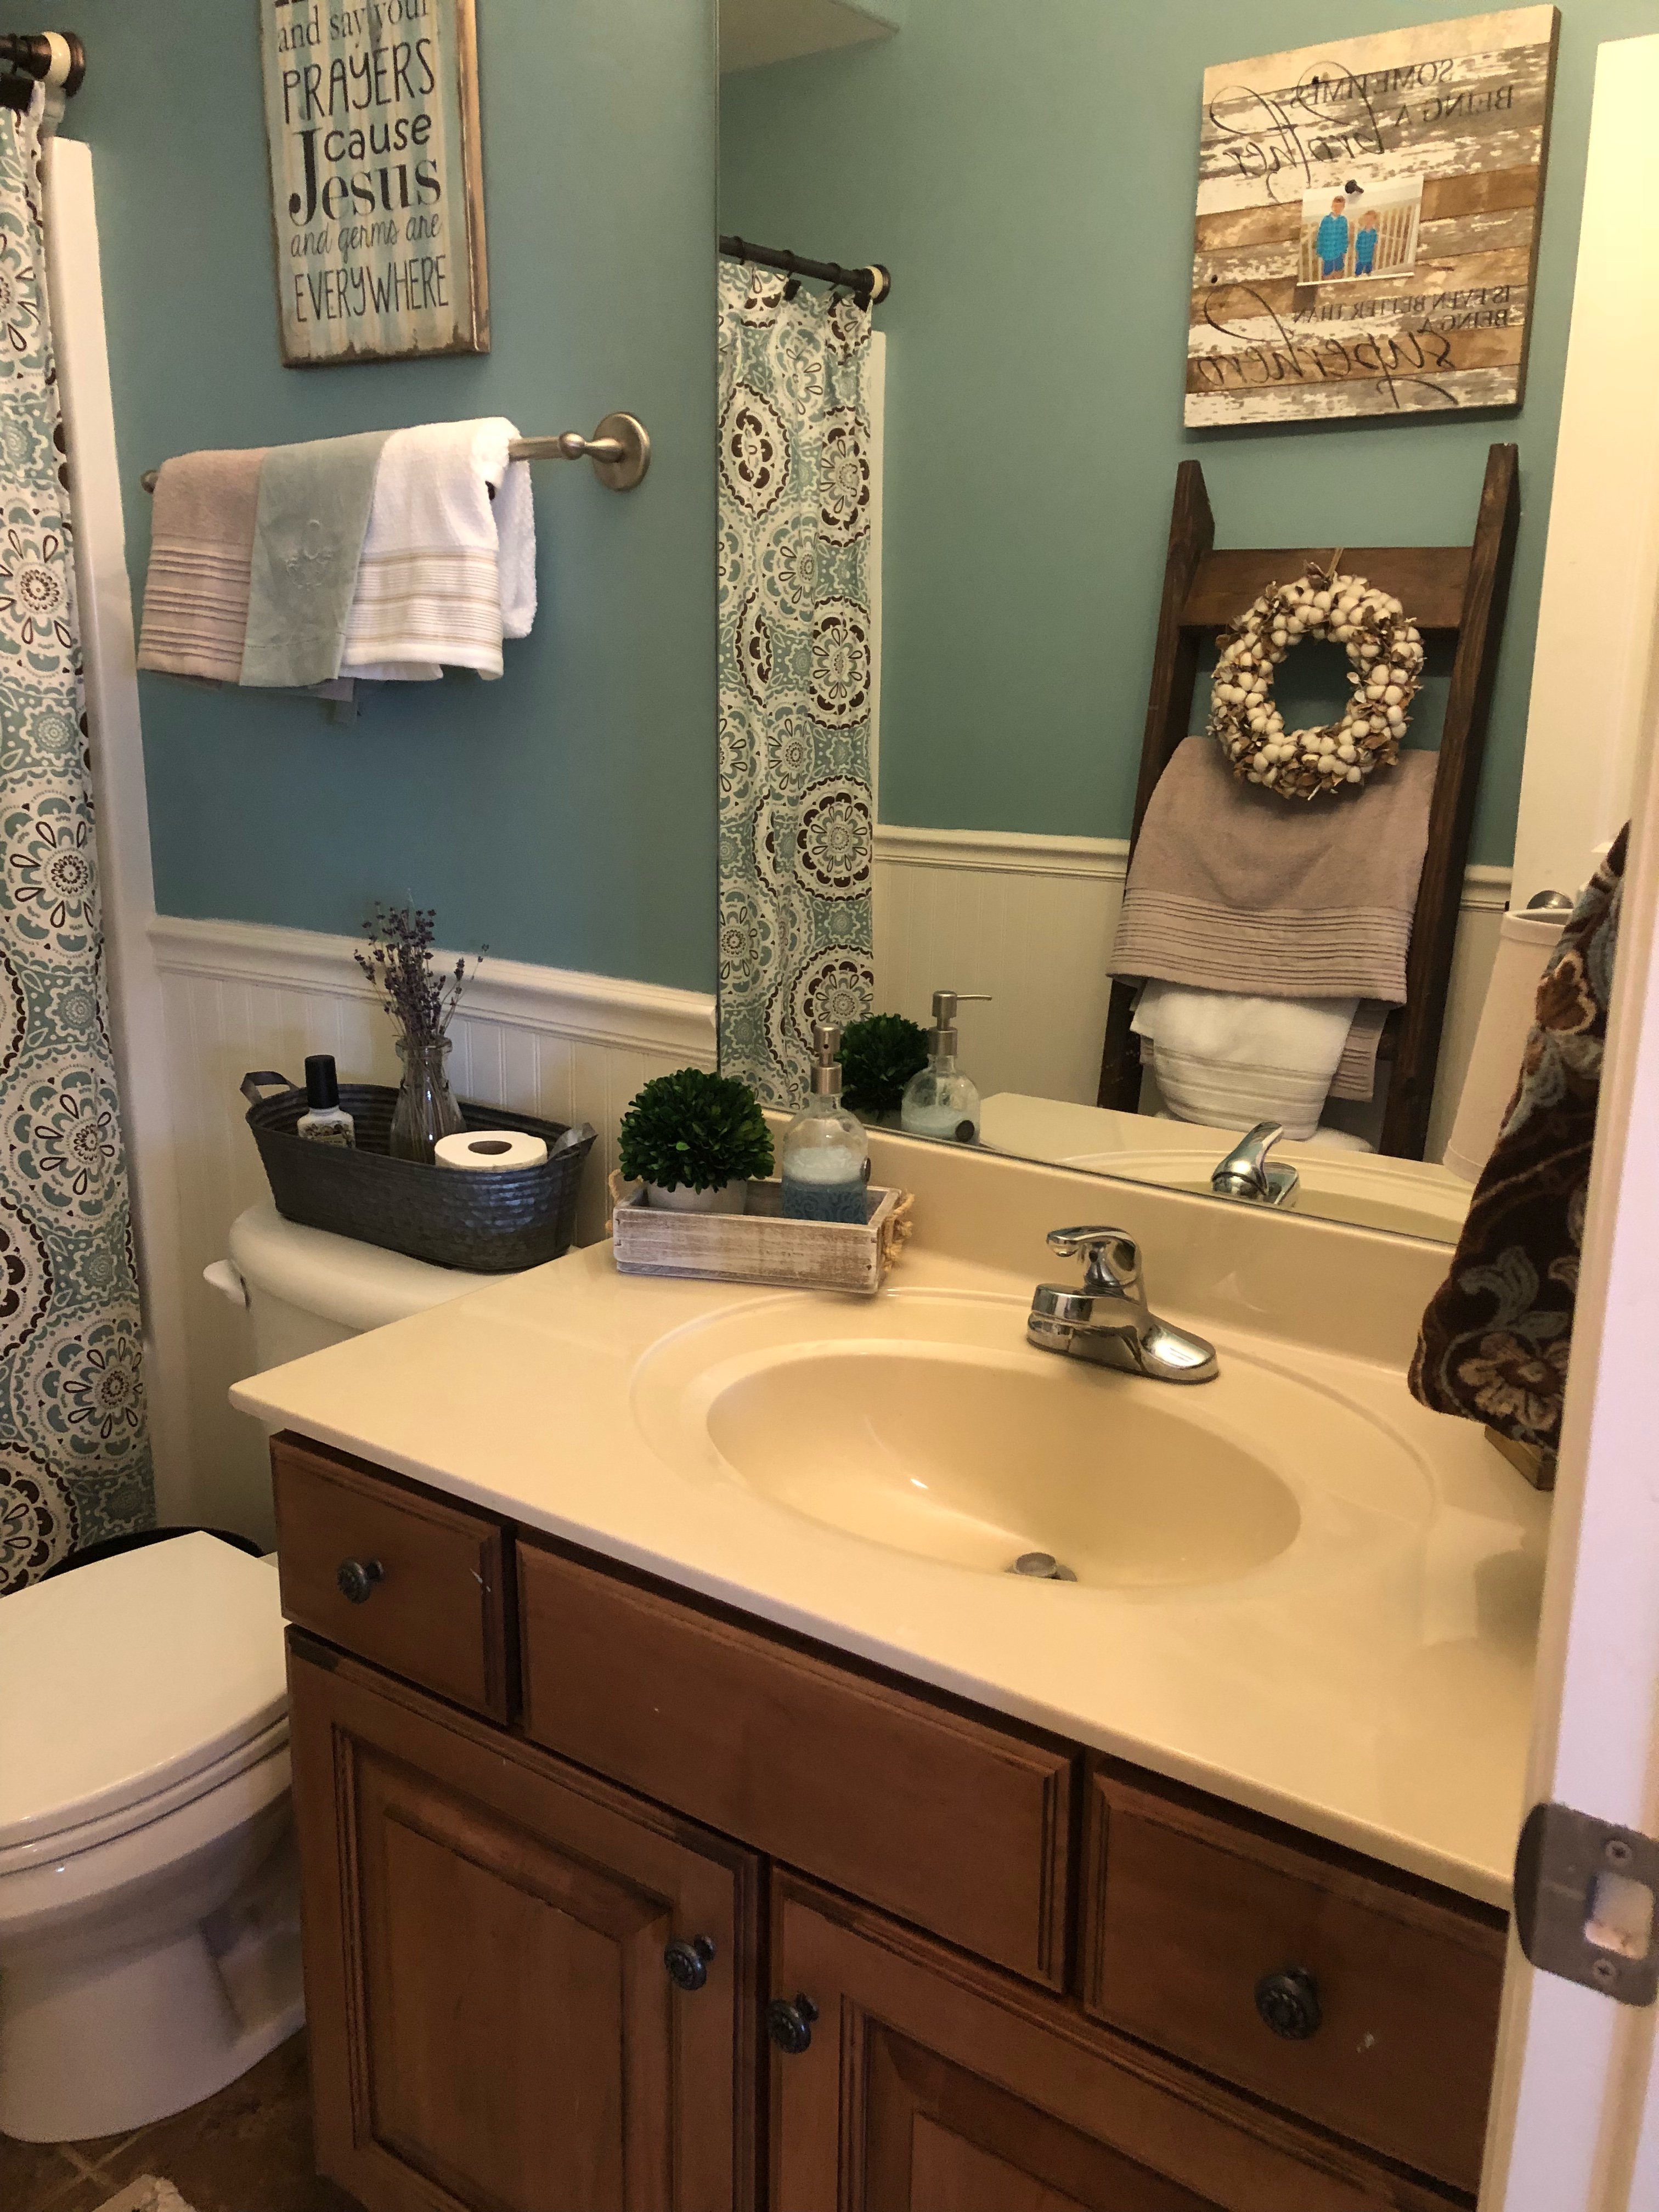 $100 Room Challenge…guest bathroom makeover! See the before pics here!